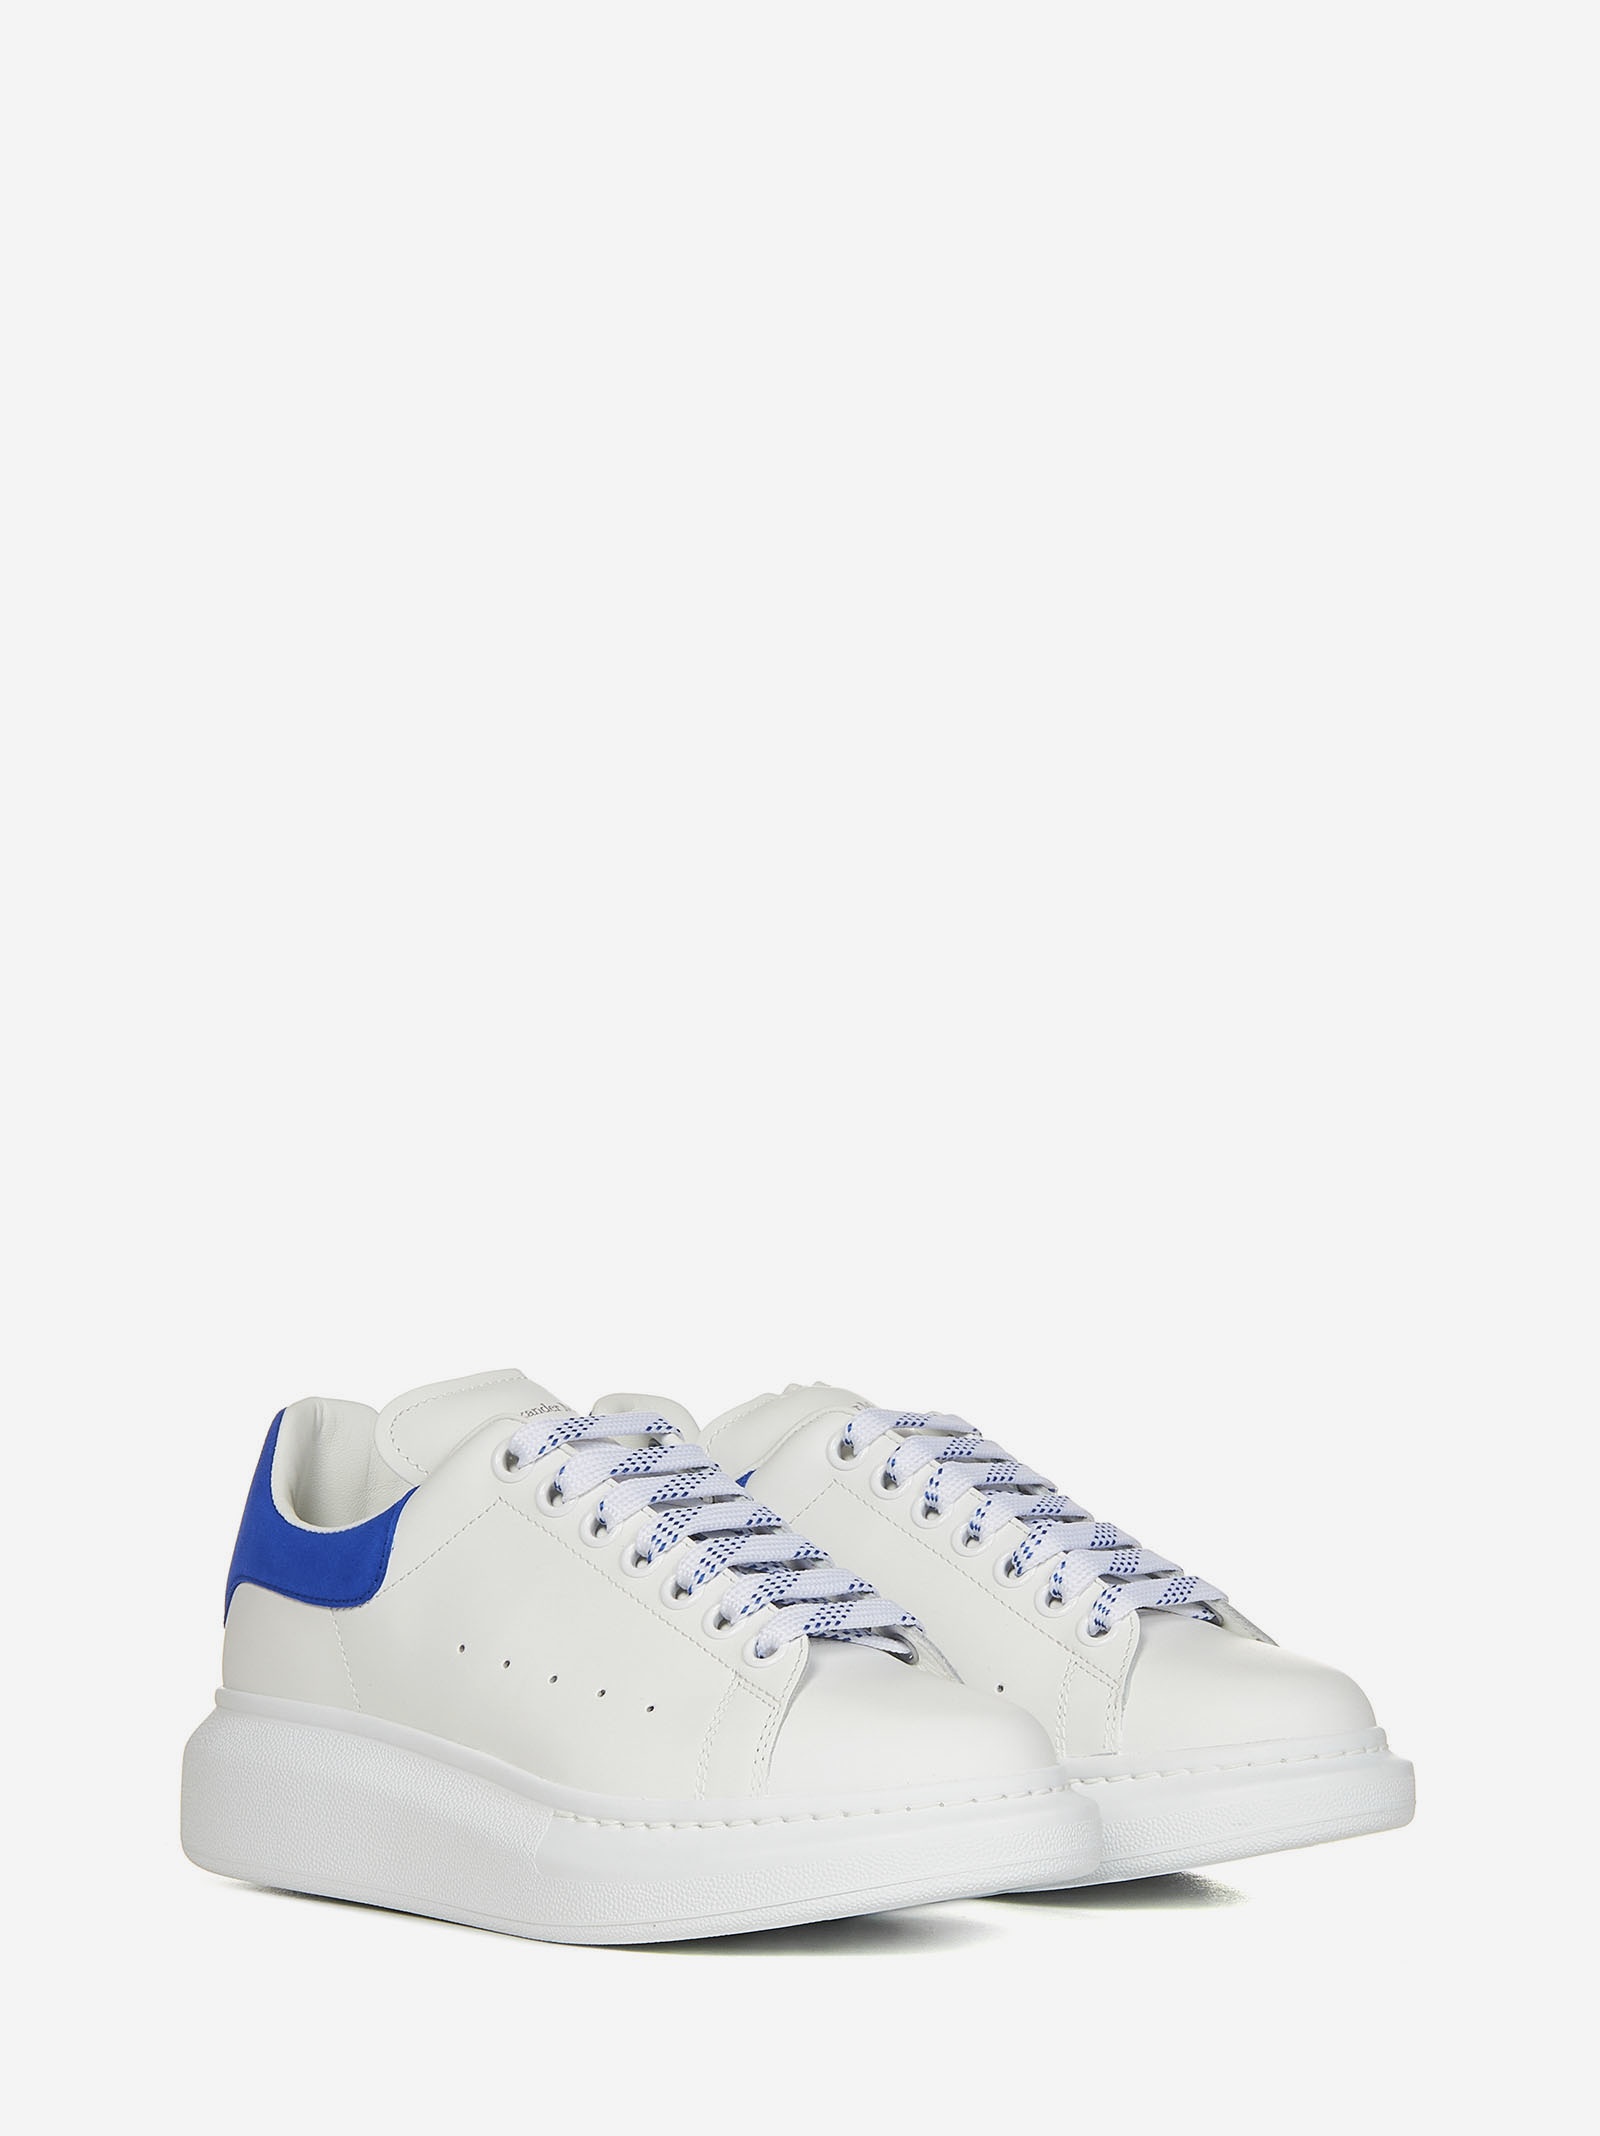 Oversize white smooth leather sneakers with electric blue suede detail on the heel. - 2